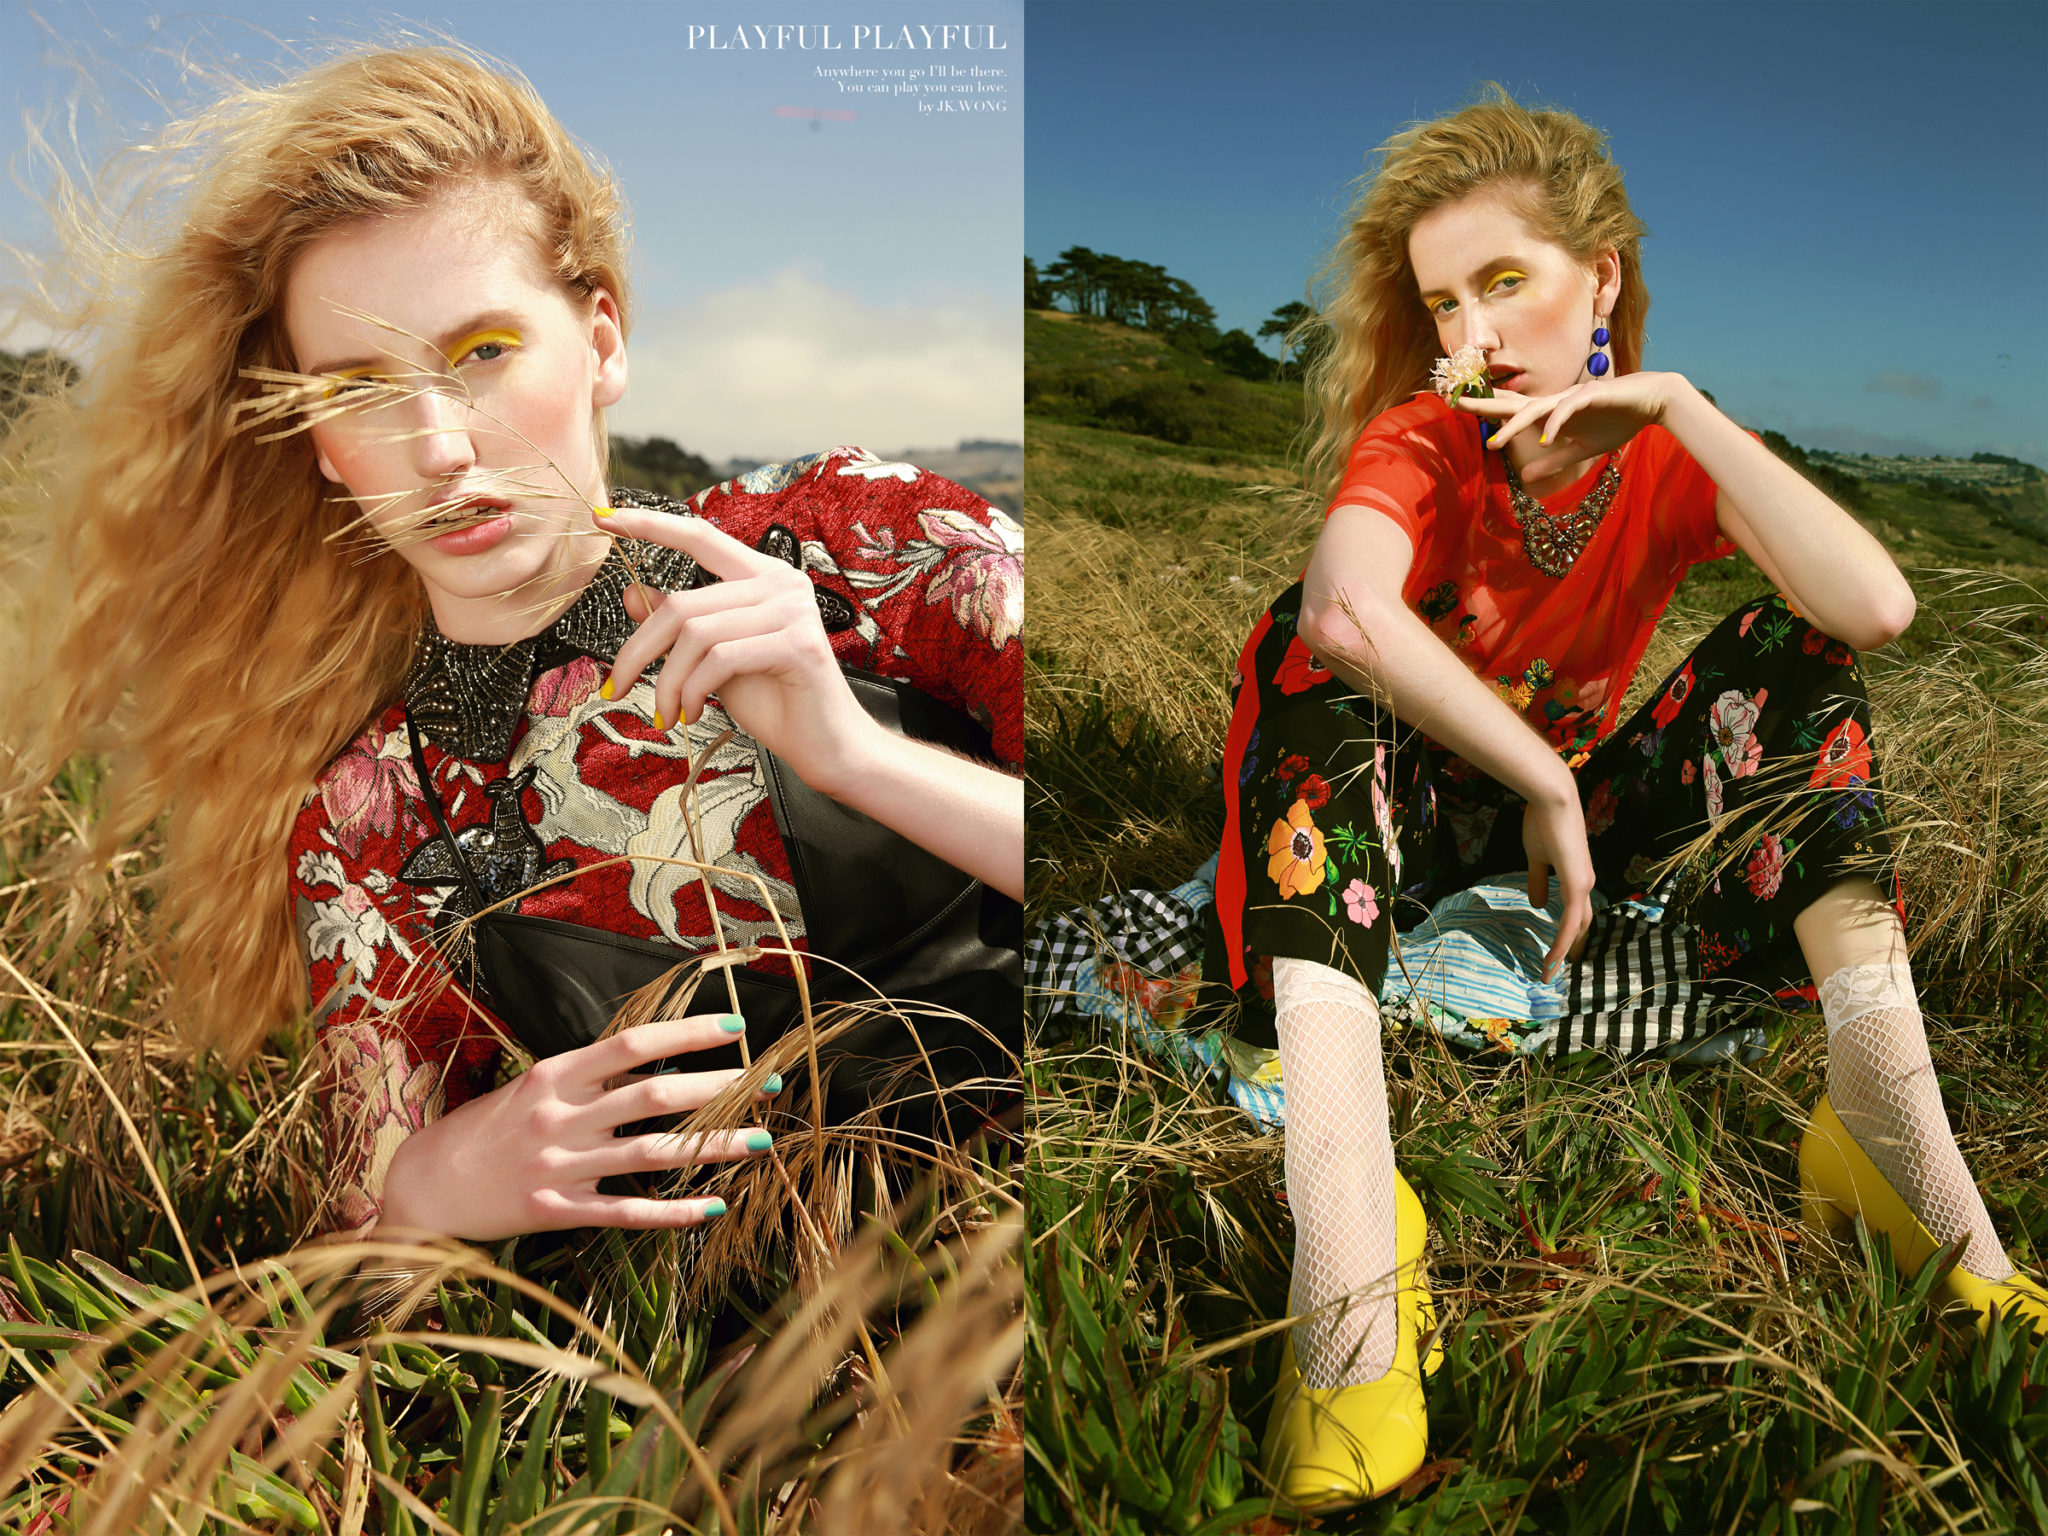 "Playful, Playful" by JK Wong featured in Vogue Italia